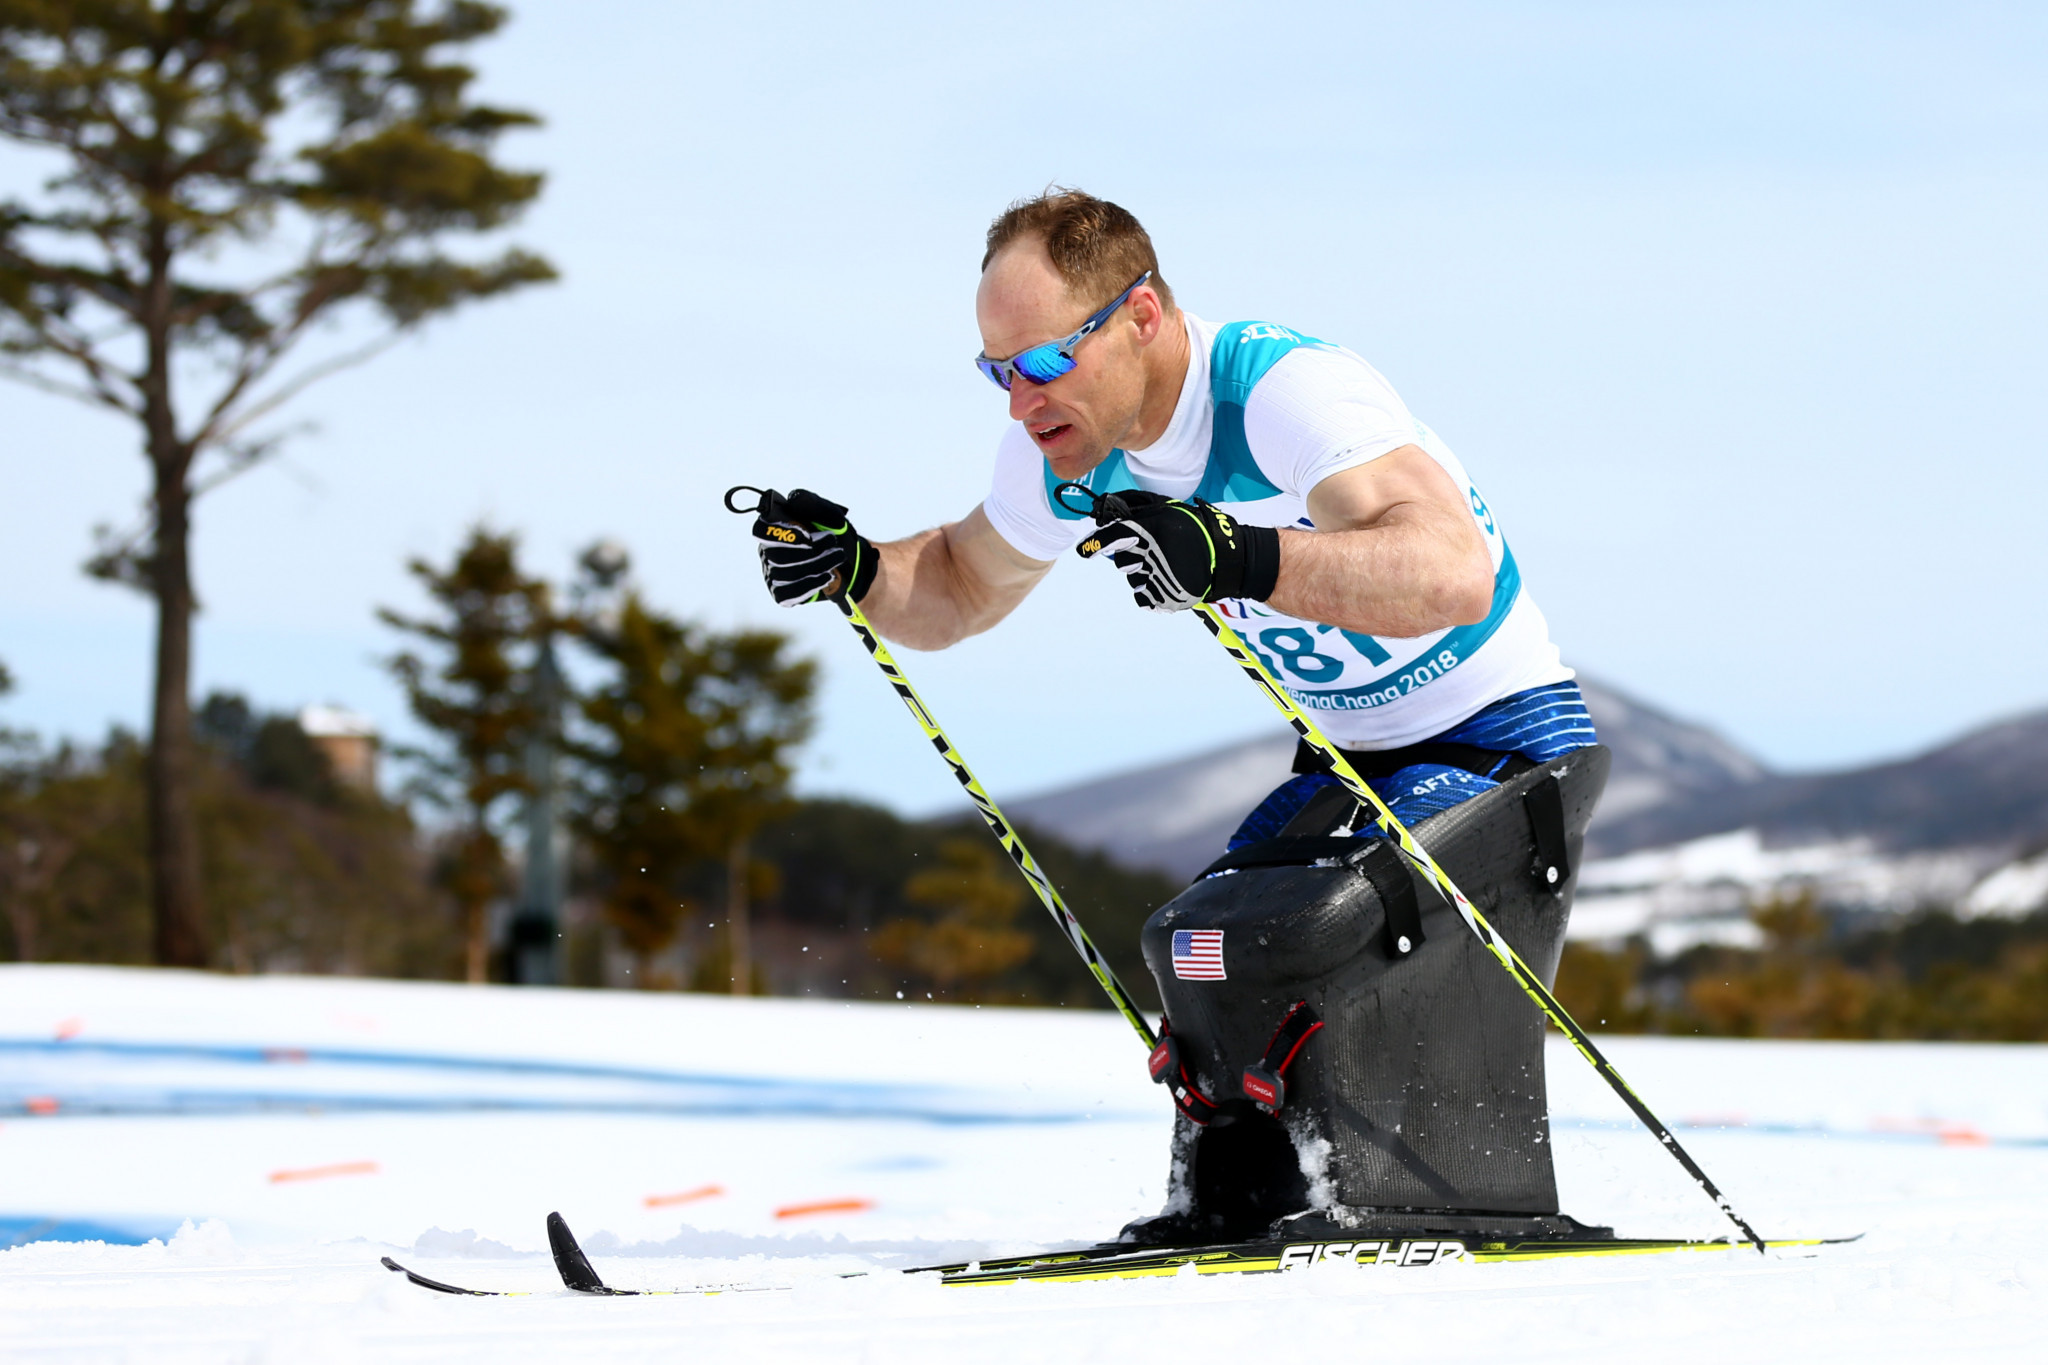 Para Nordic skier Daniel Cnossen won the Team USA male athlete of the month award for January ©Getty Images